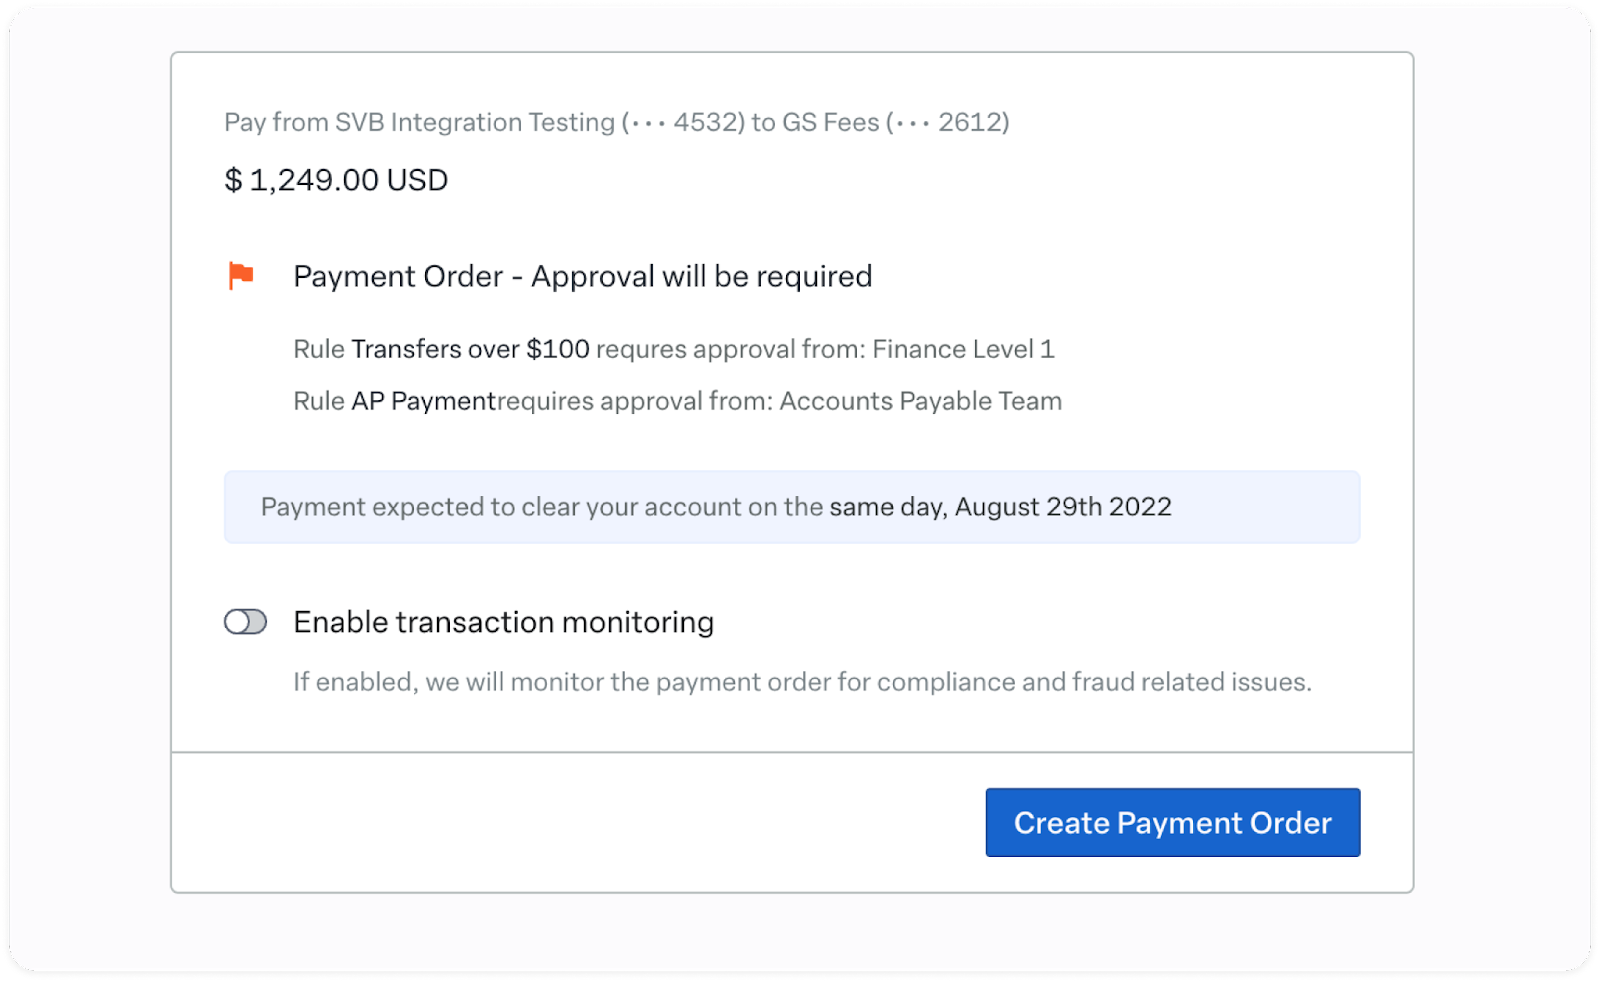 New Payment Order Create Experience